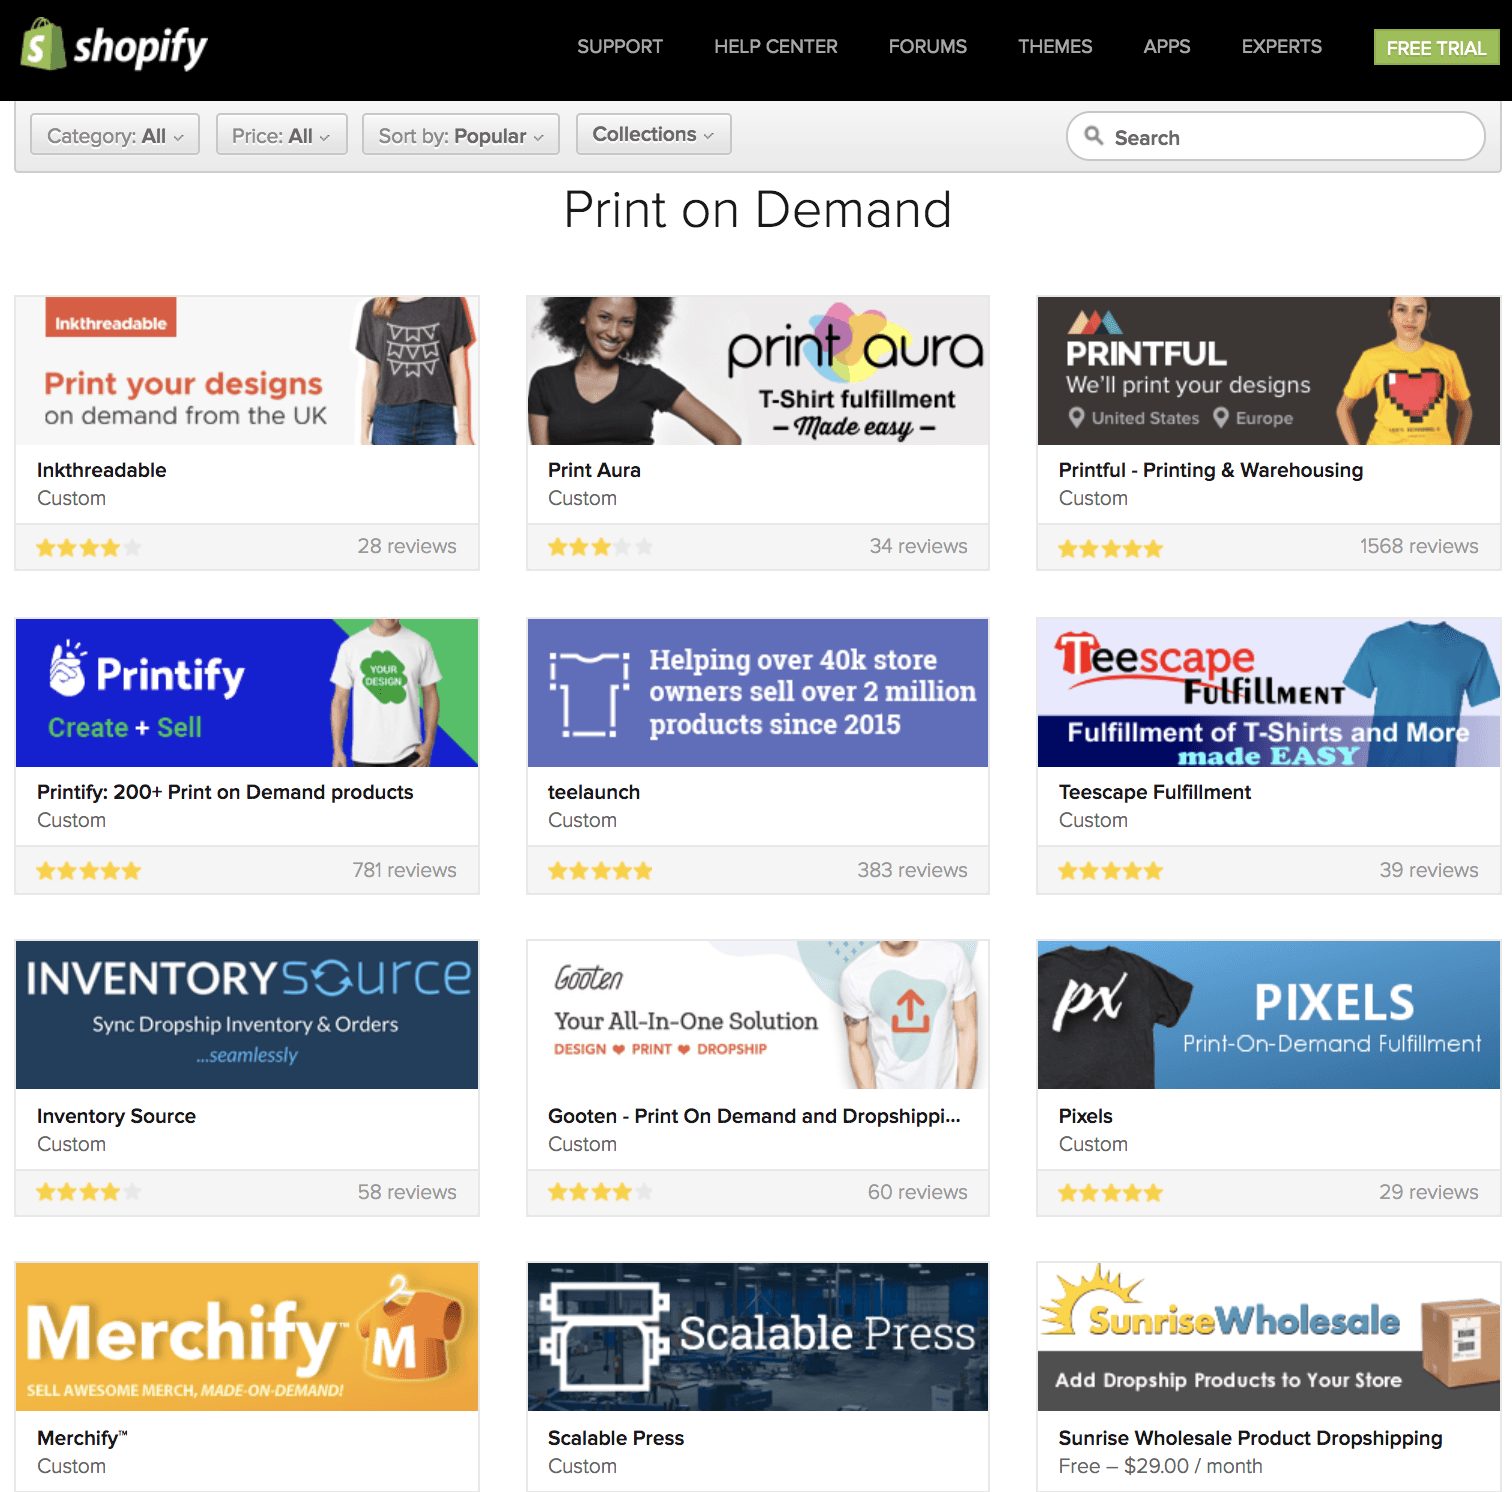 Print on Demand apps on shopify